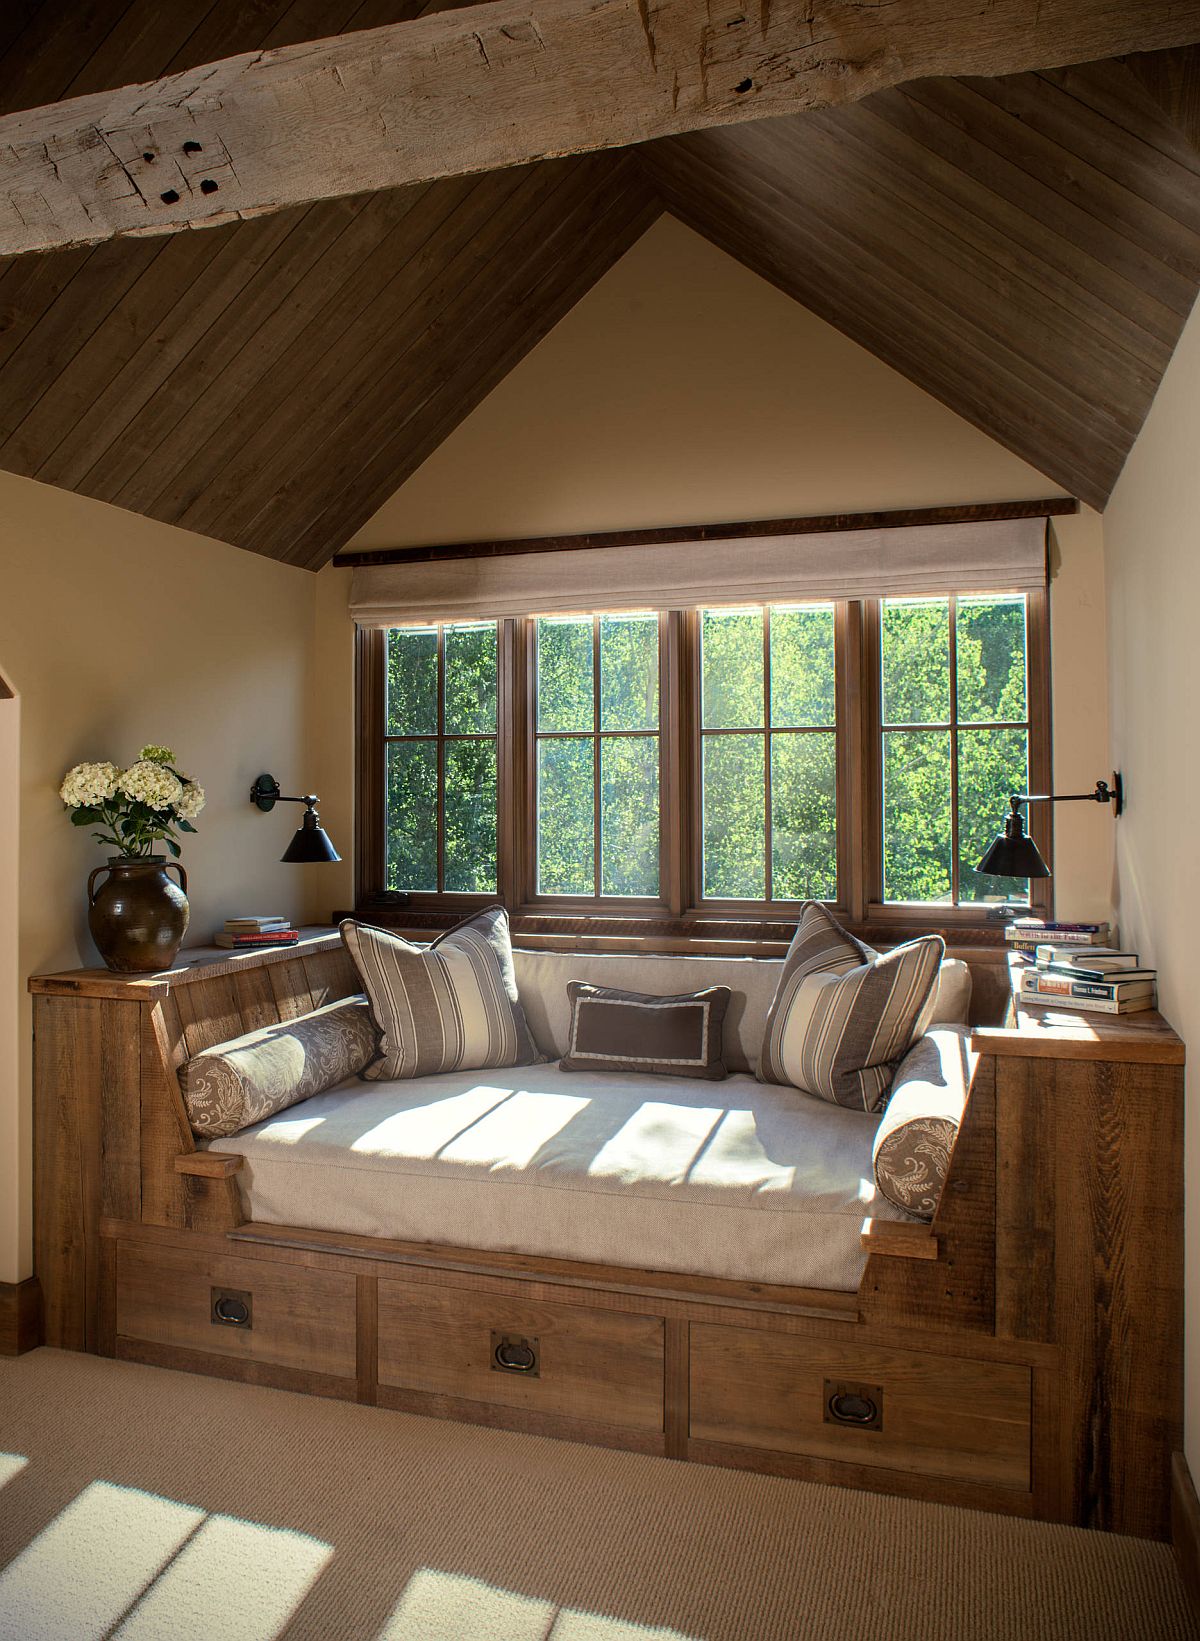 Turn-the-niche-in-the-attic-bedroom-into-a-comfortable-reading-nook-using-built-in-seating-38632